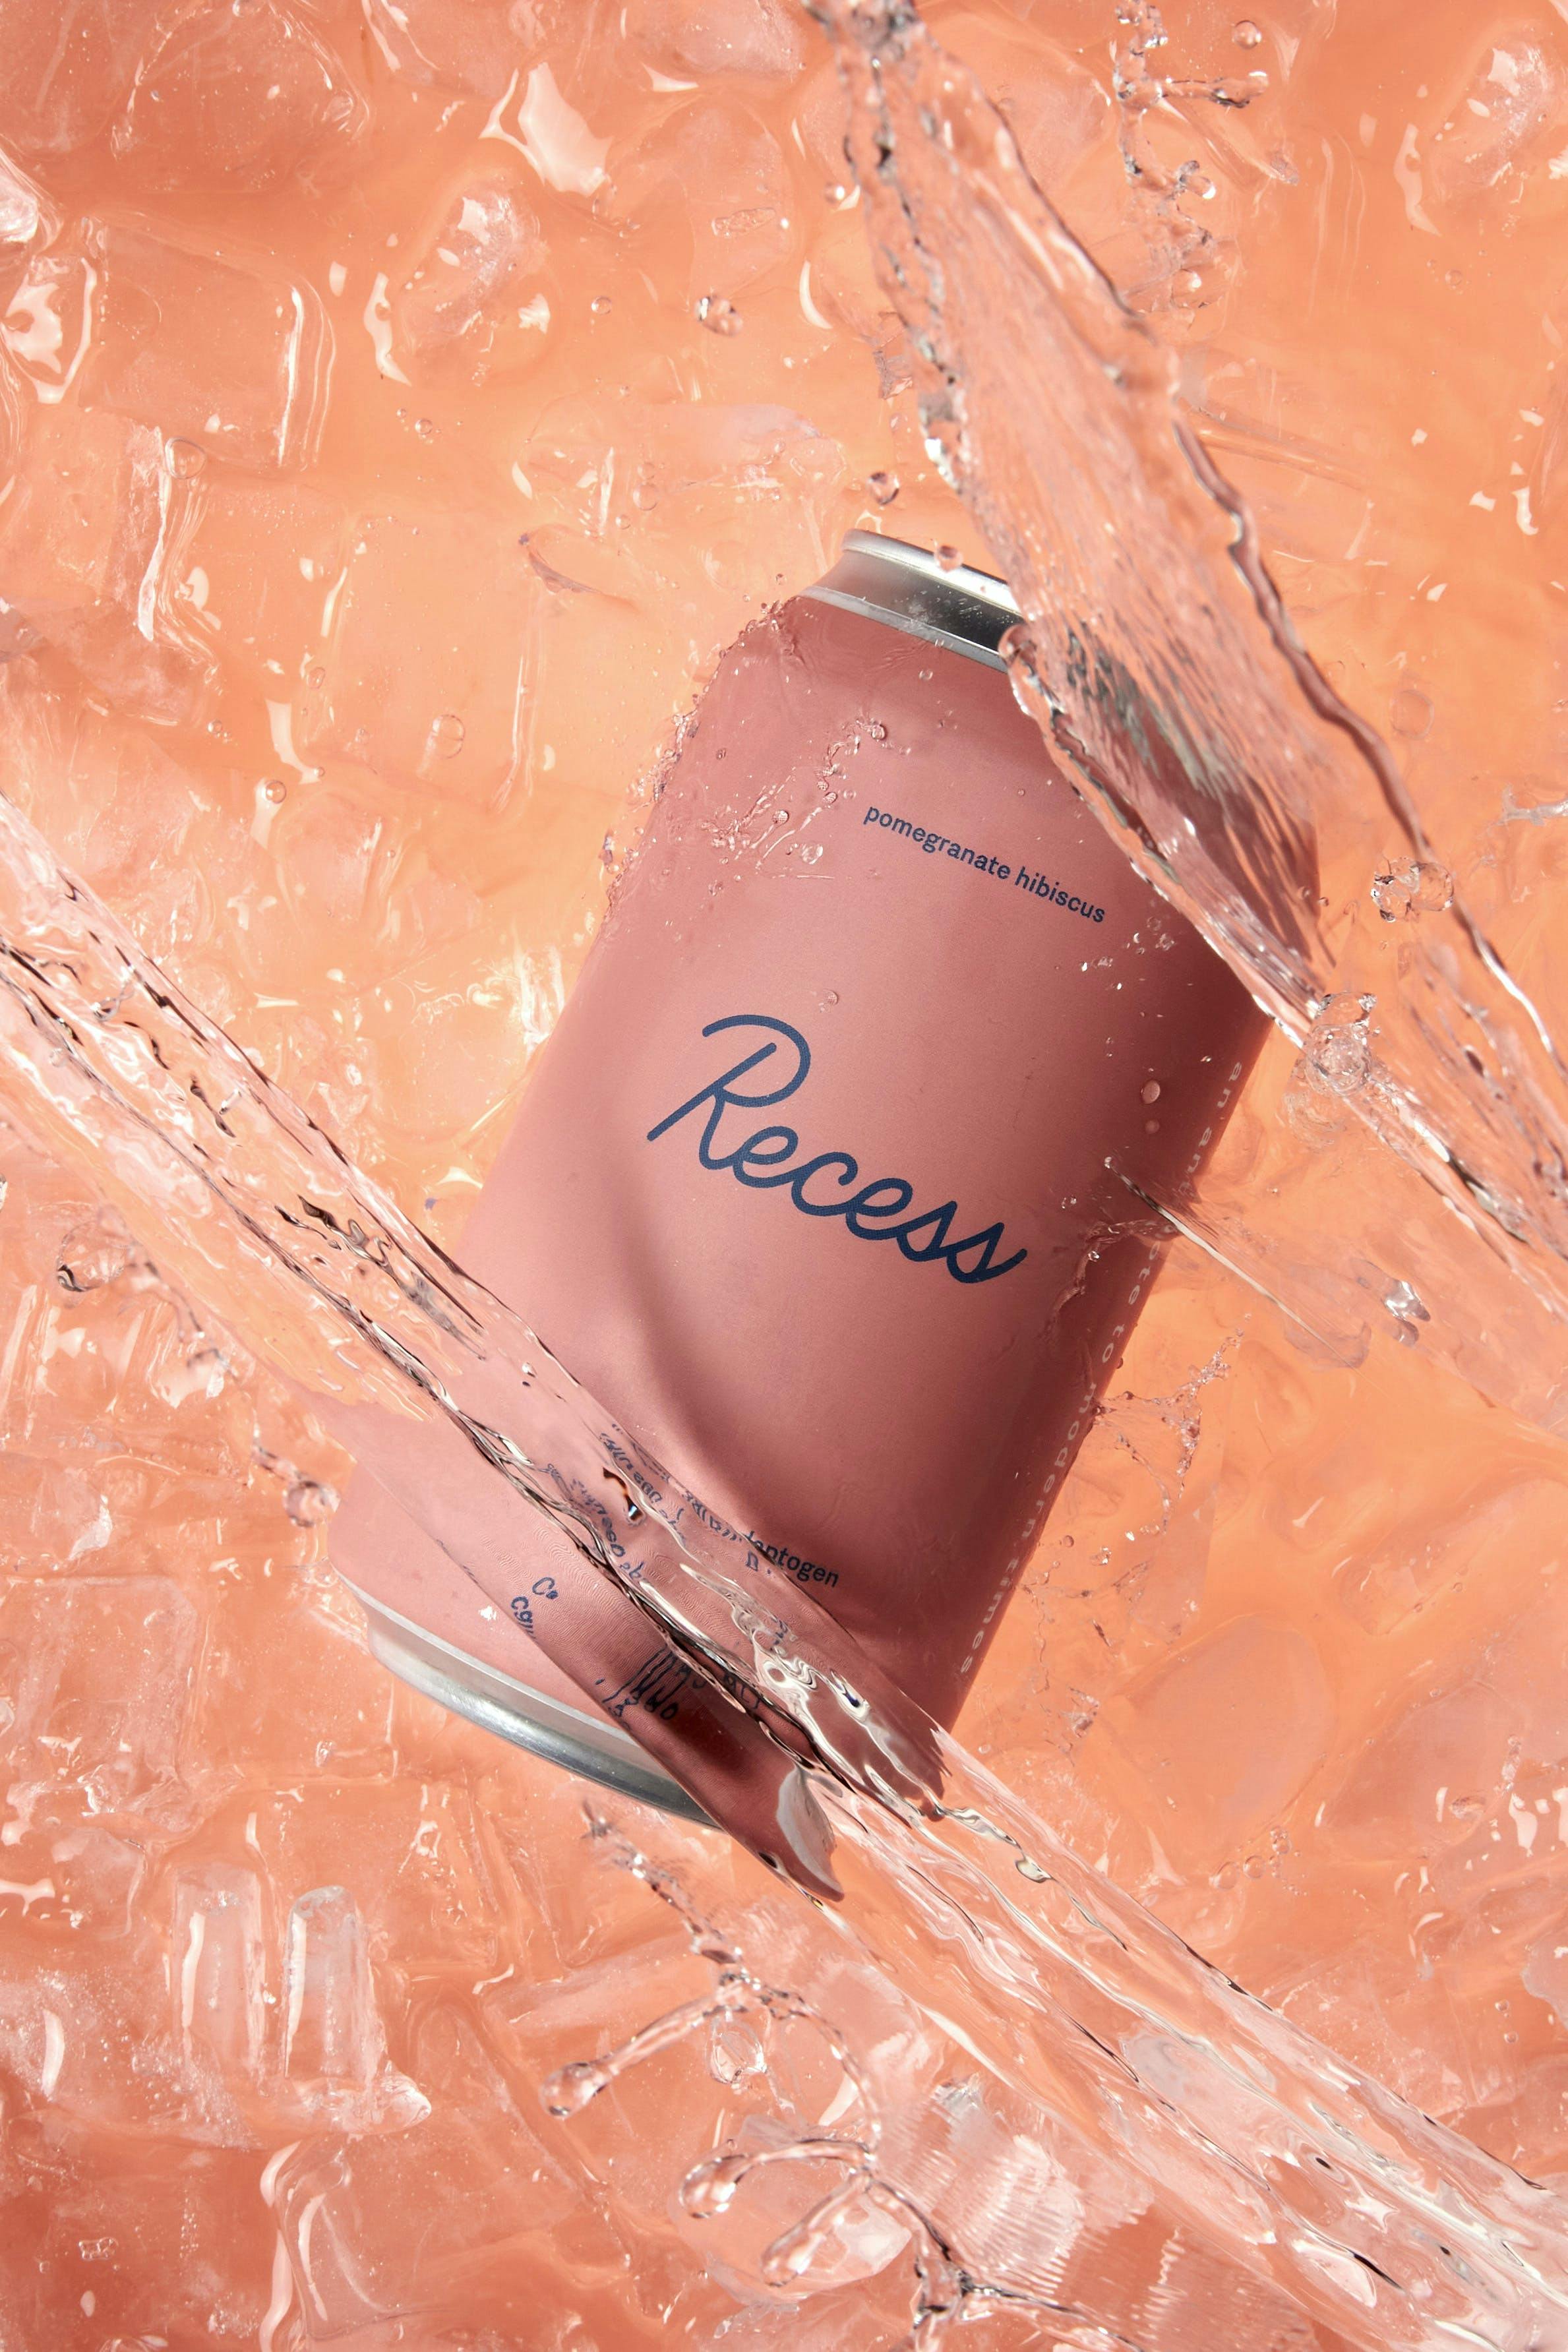 Recess beverage can with lively splashes in crystal-clear water, capturing the essence of energy and refreshment